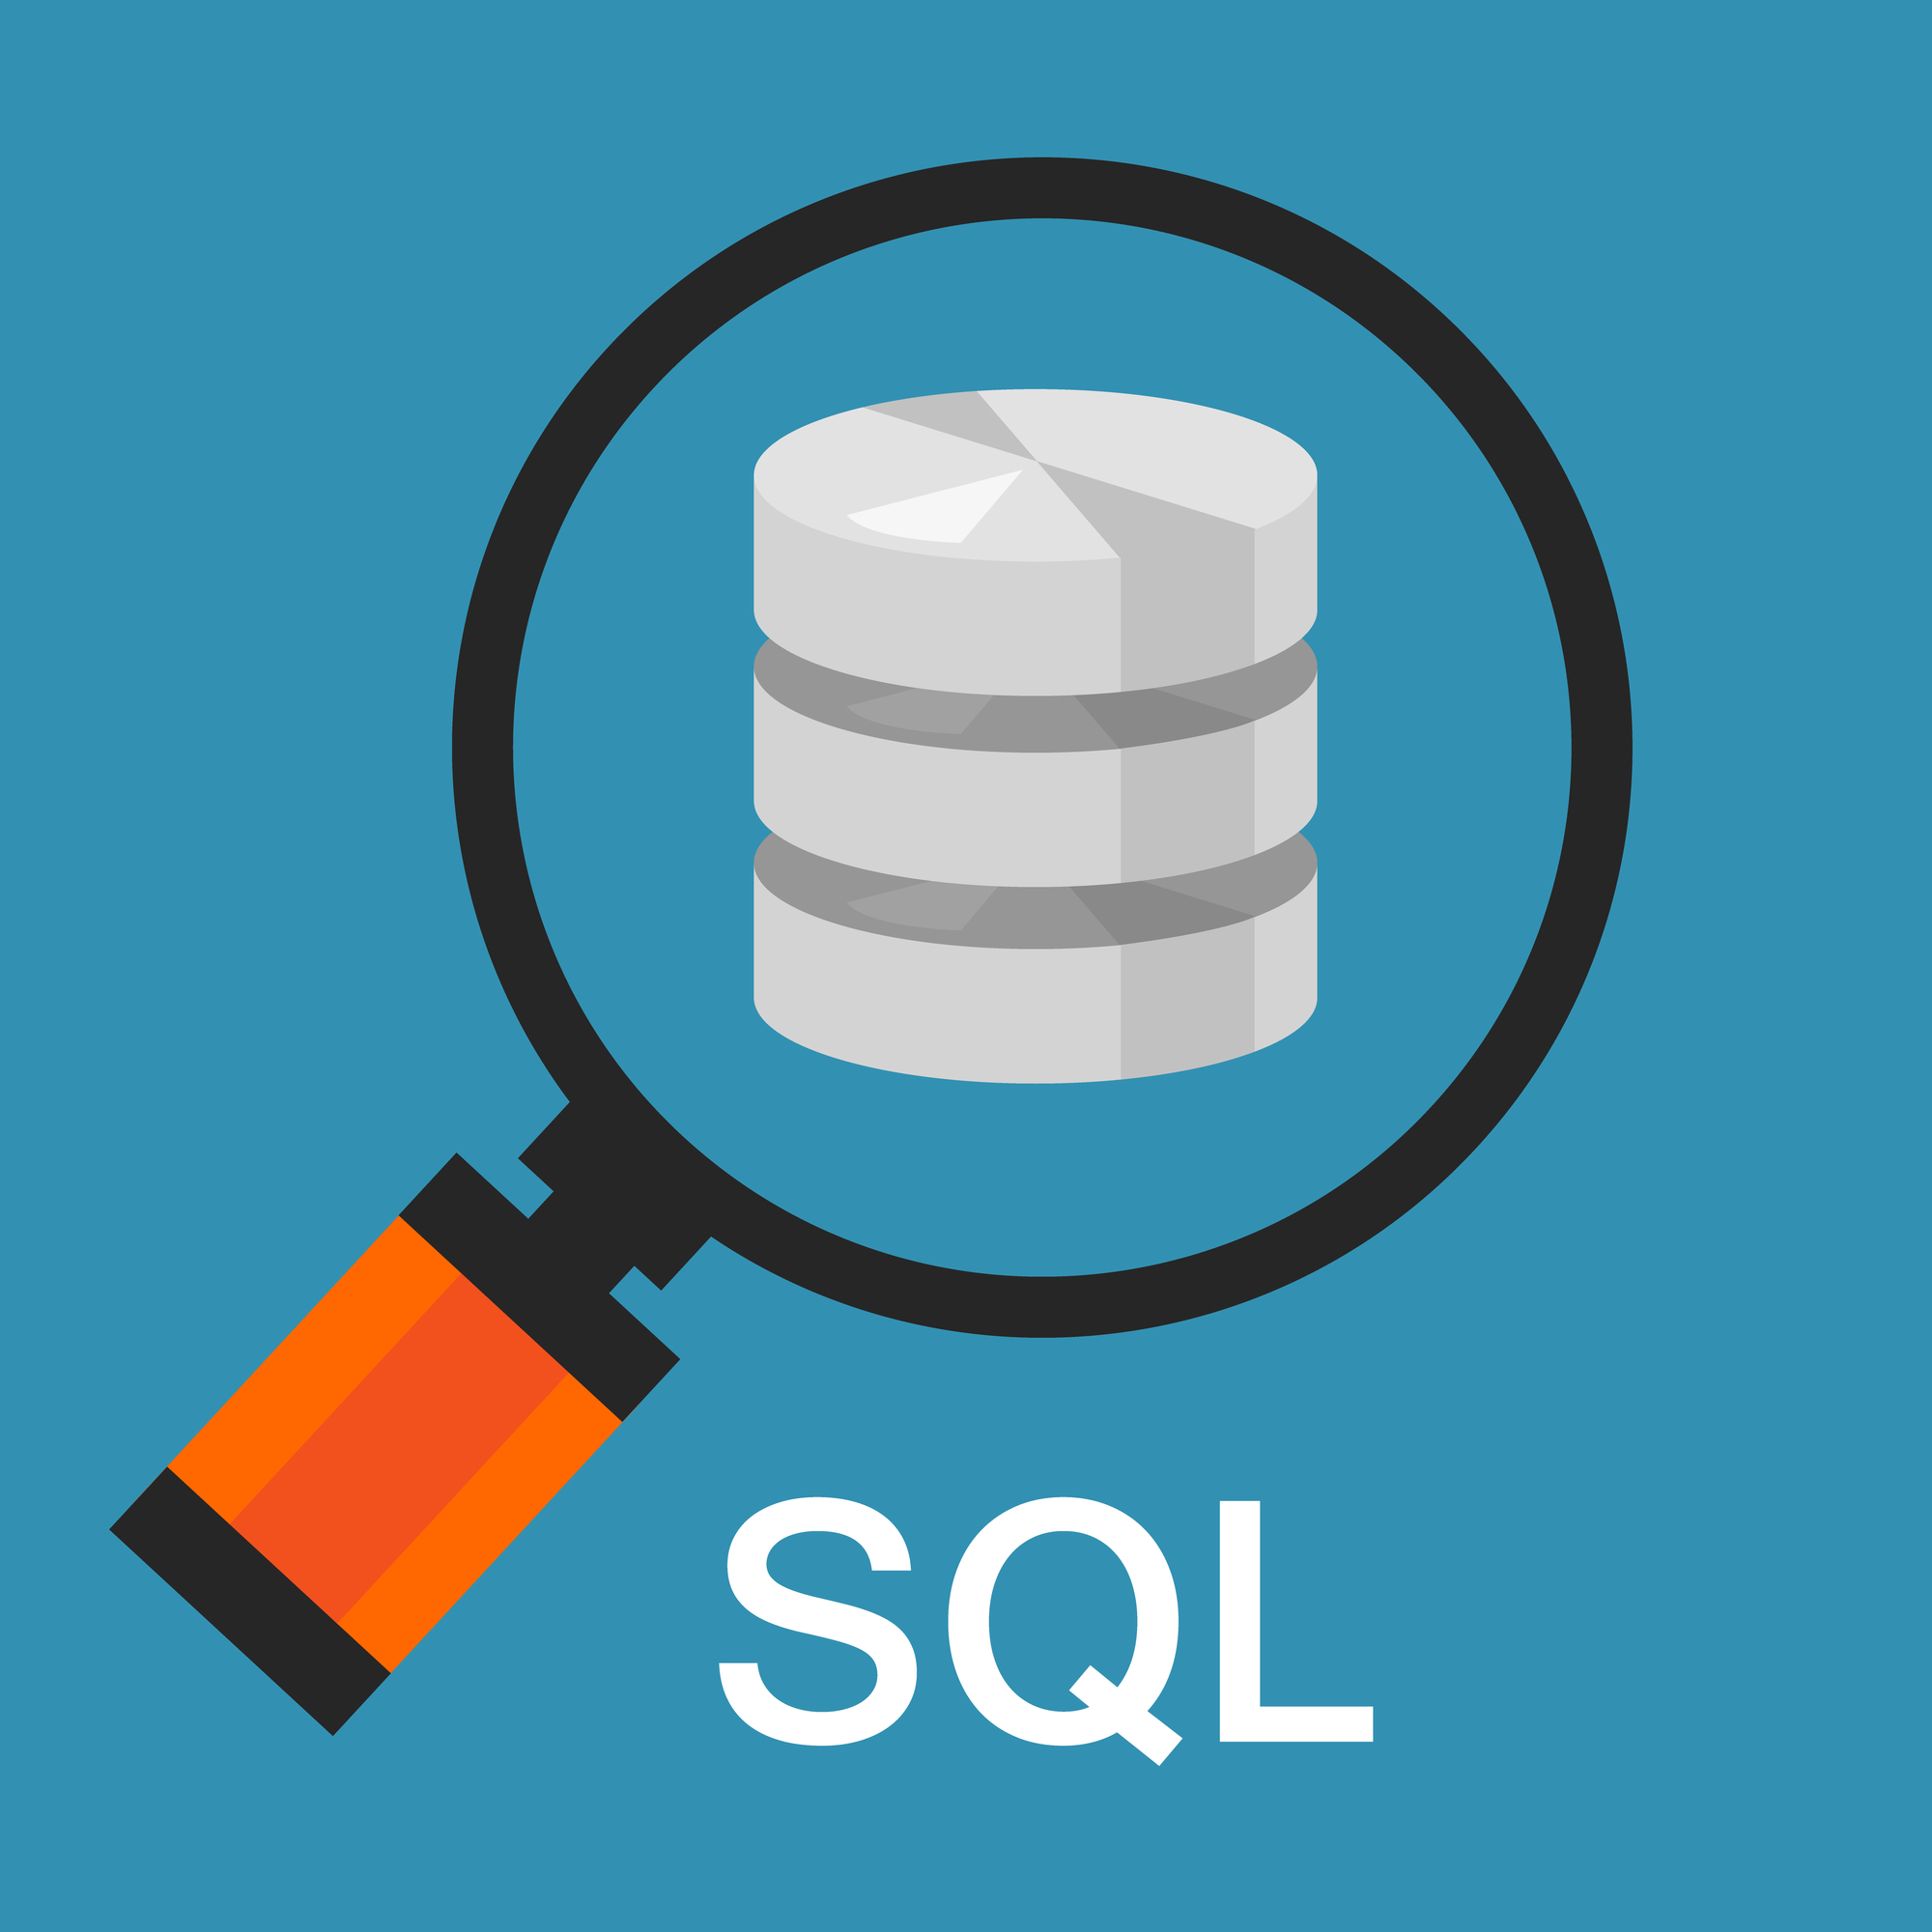 How To Find The SQL ID Of The Statement You Just Ran?